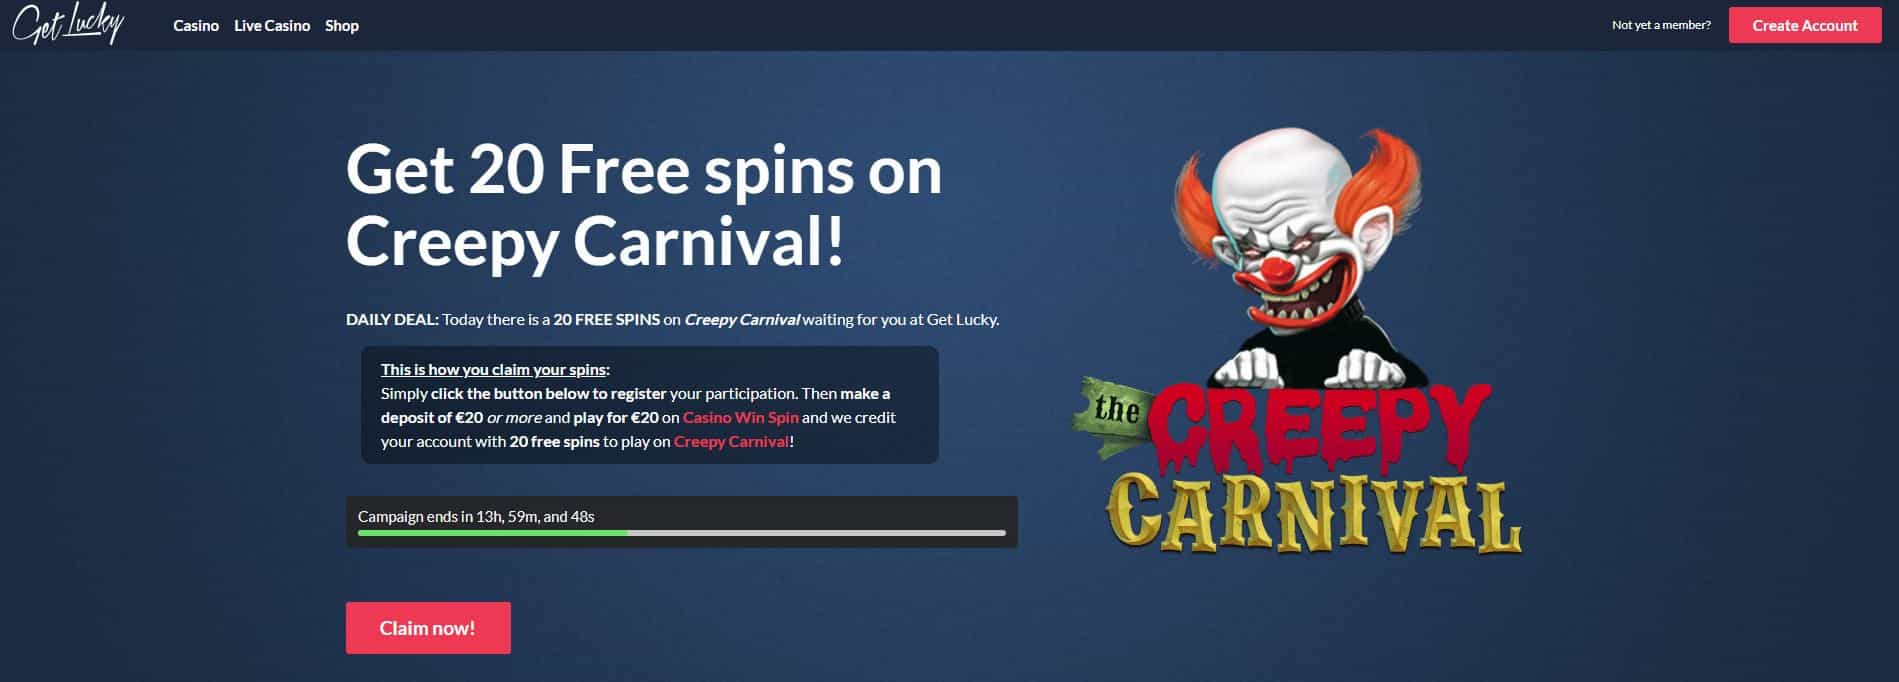 Lucky creek casino free spins july 2020